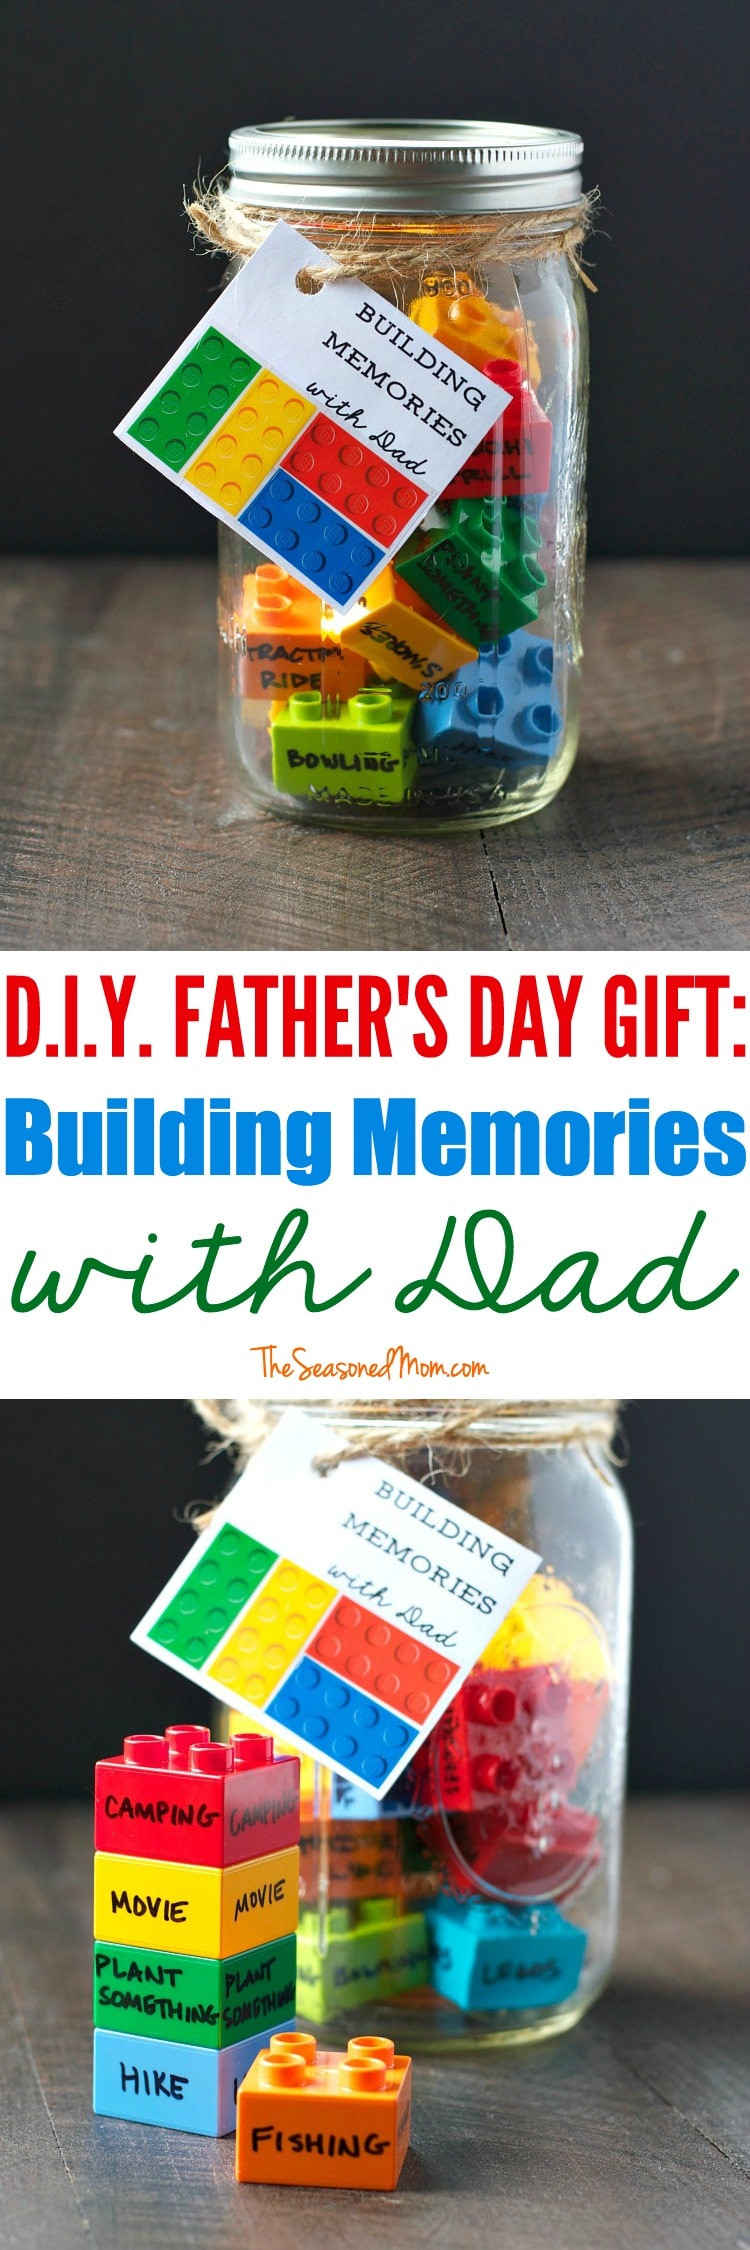 Gifts From Kids To Dad
 25 Homemade Father s Day Gifts from Kids That Dad Can